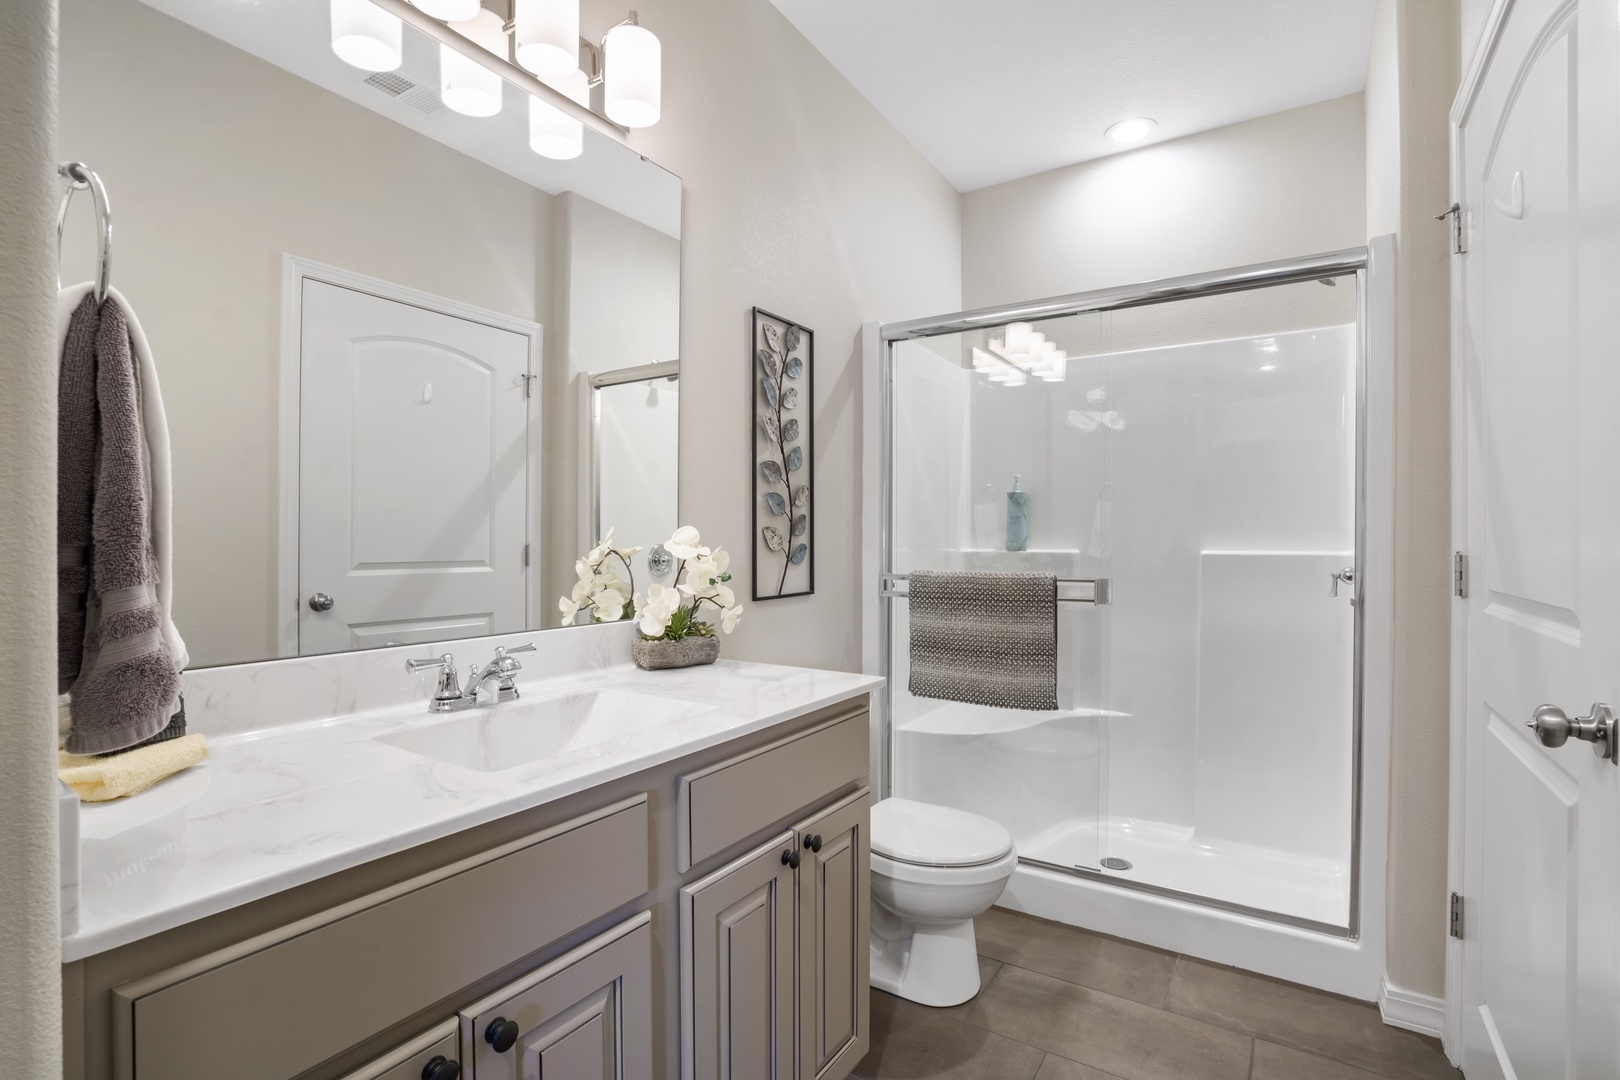 Bathroom 1 share en-suite with walk-in shower accessible from living area, and bedroom 1